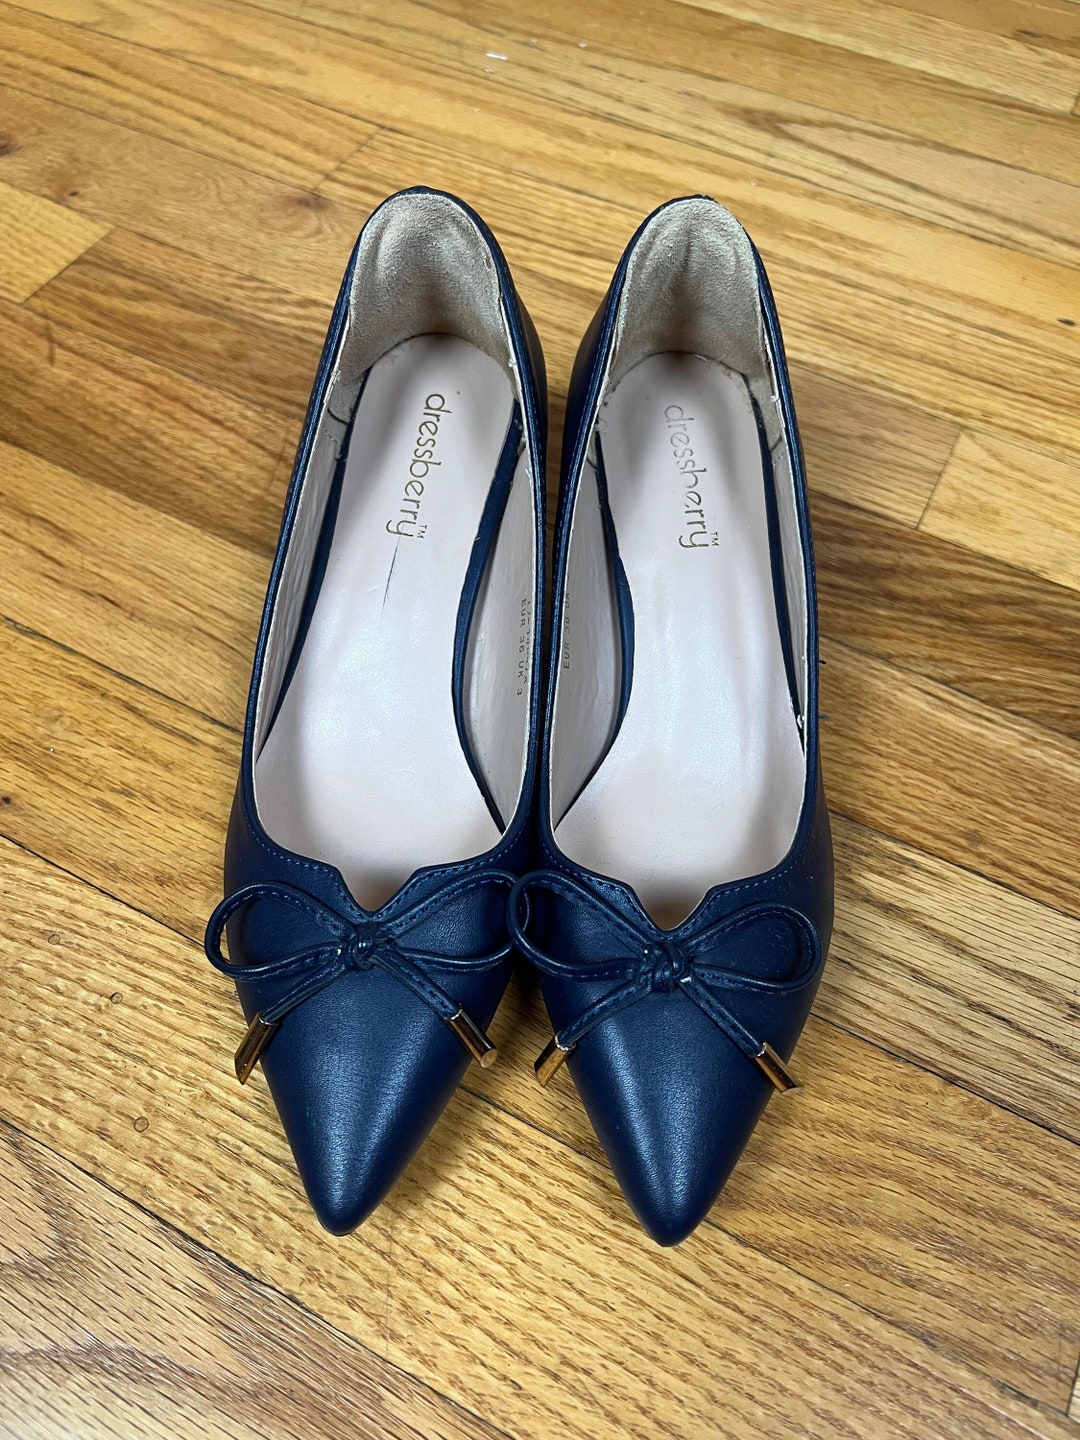 Vintage Navy Blue Kitten Heels With Bows Size US 5 - Etsy